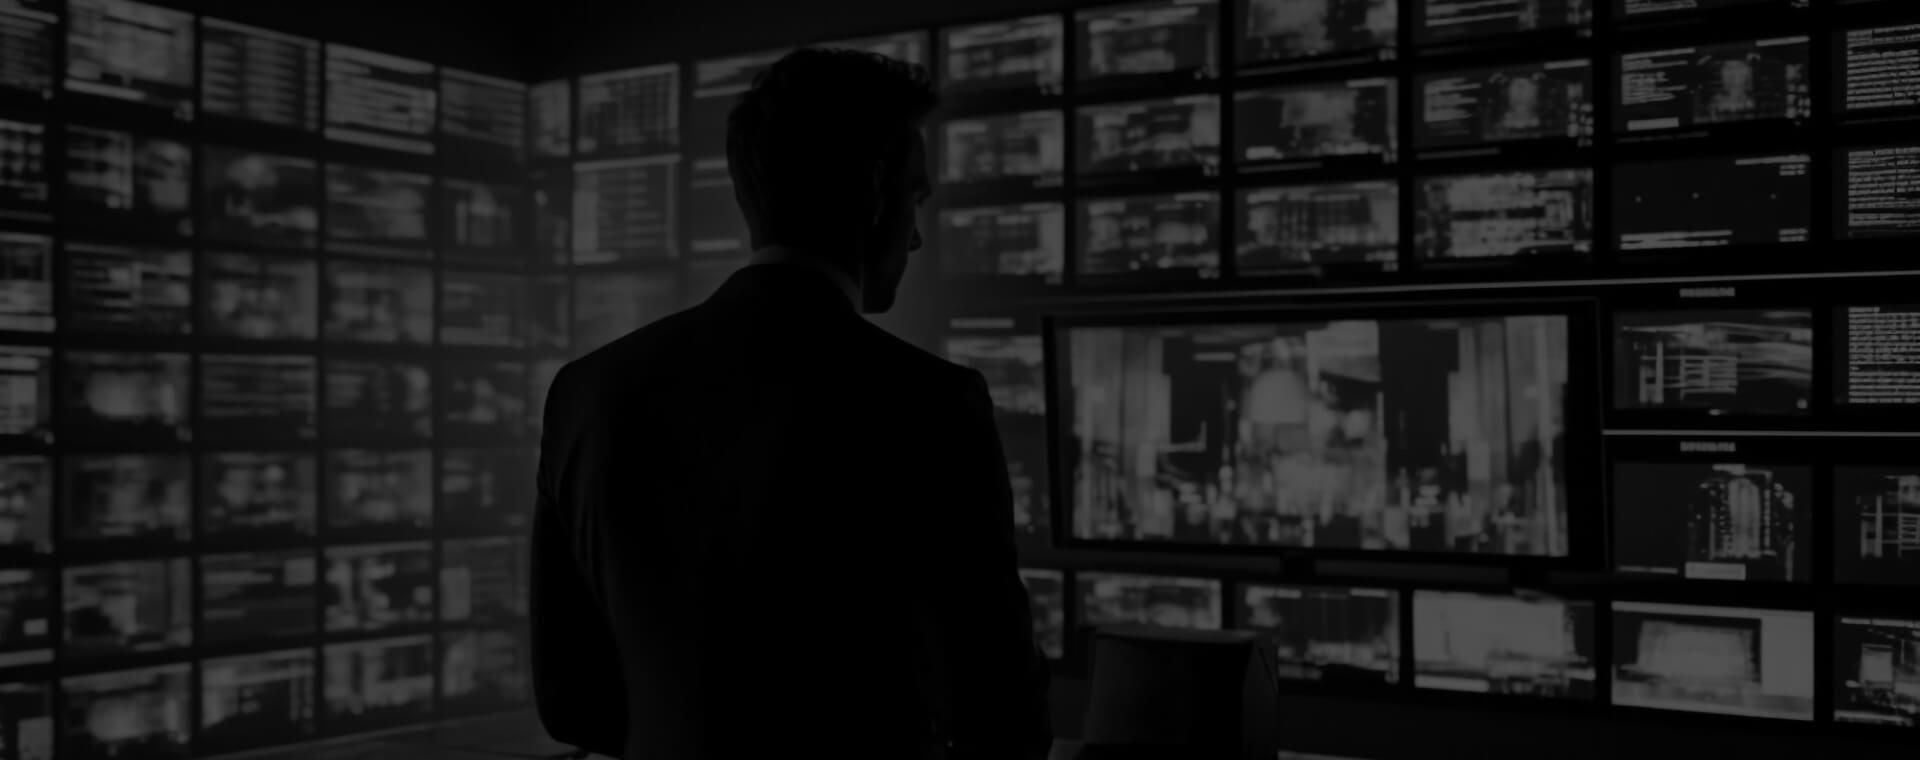 Choosing the Right Approach
for Video Surveillance Systems:
On-Premise Servers, Cloud Computing, or Edge